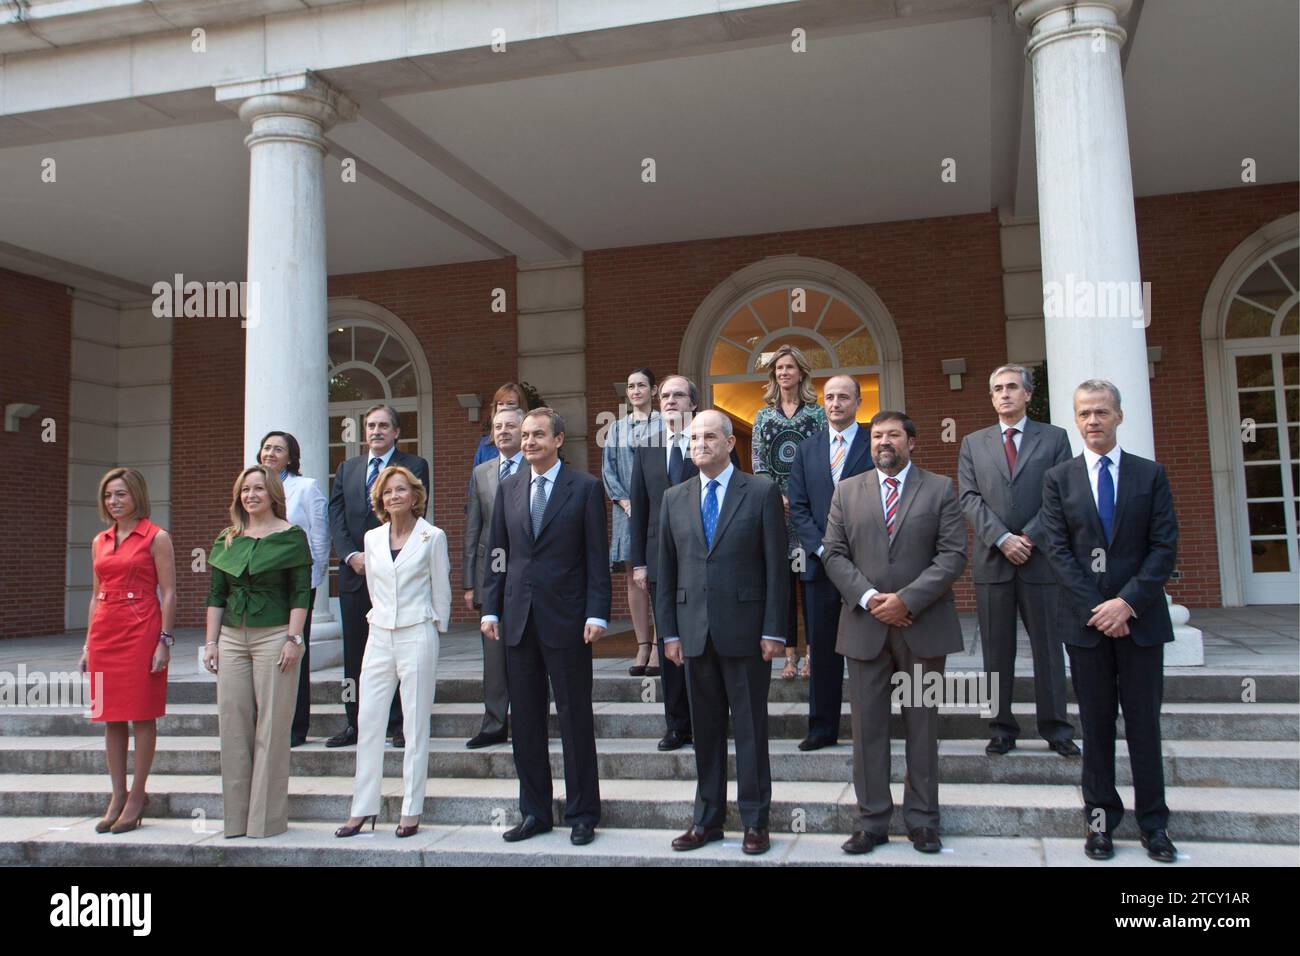 07/22/2011 Madrid, Moncloa Palace. Jose Luis Rodriguez Zapatero presents his new government after the departure of Rubalcaba Photo, Isabel Permuy ARCHDC. Credit: Album / Archivo ABC / Isabel B Permuy Stock Photo